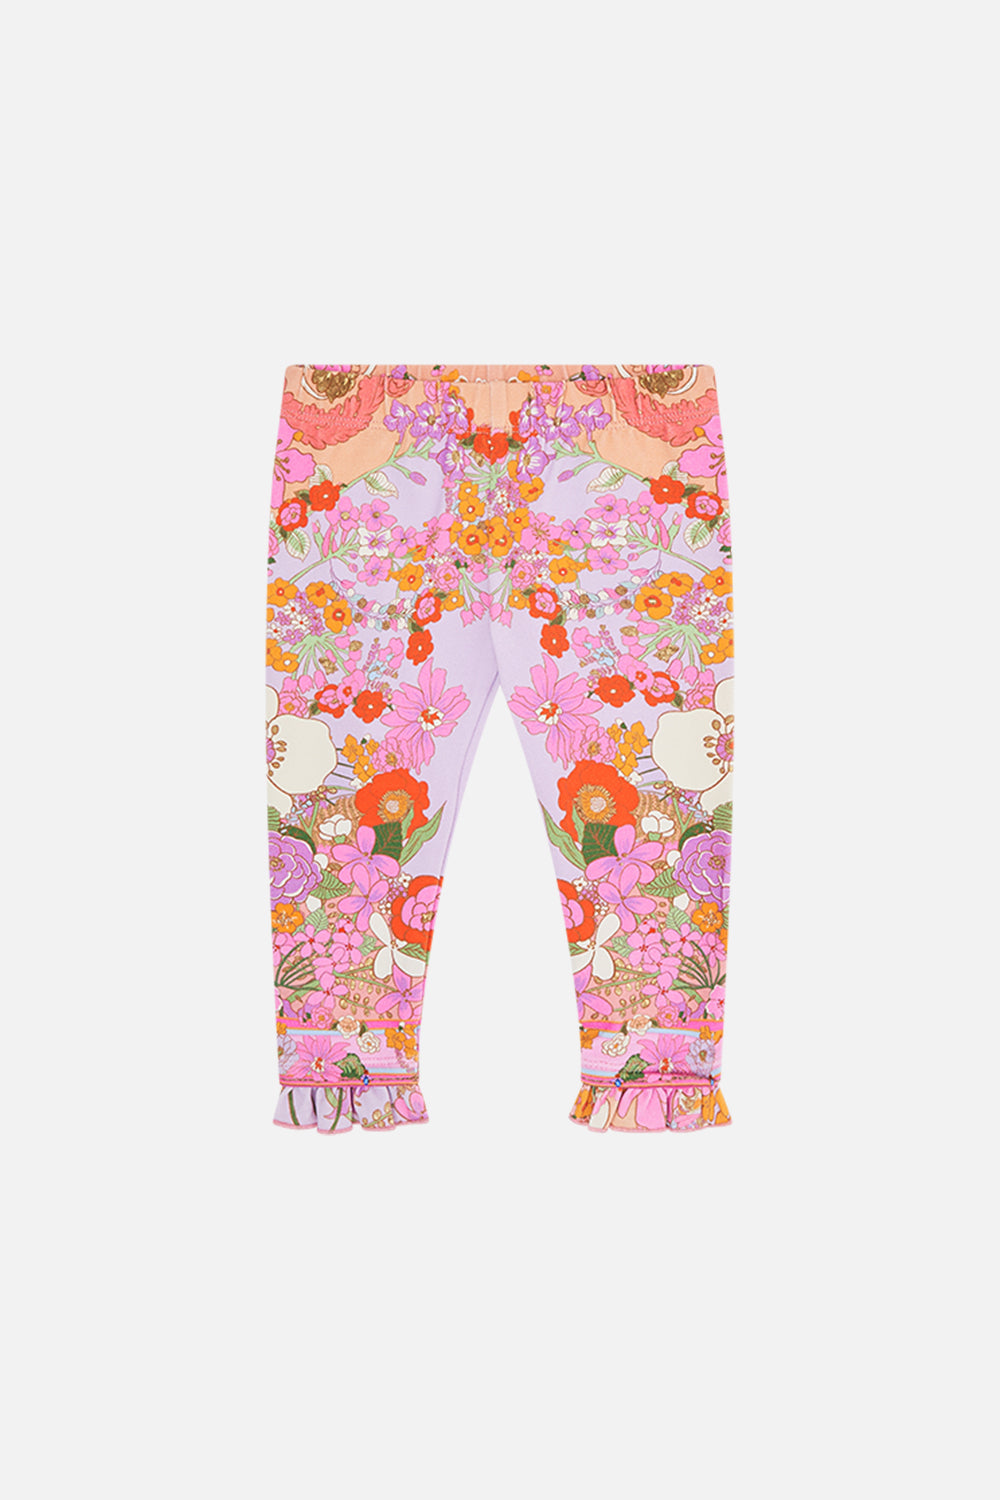 Milla by CAMILLA babies leggings in Clever Clogs print